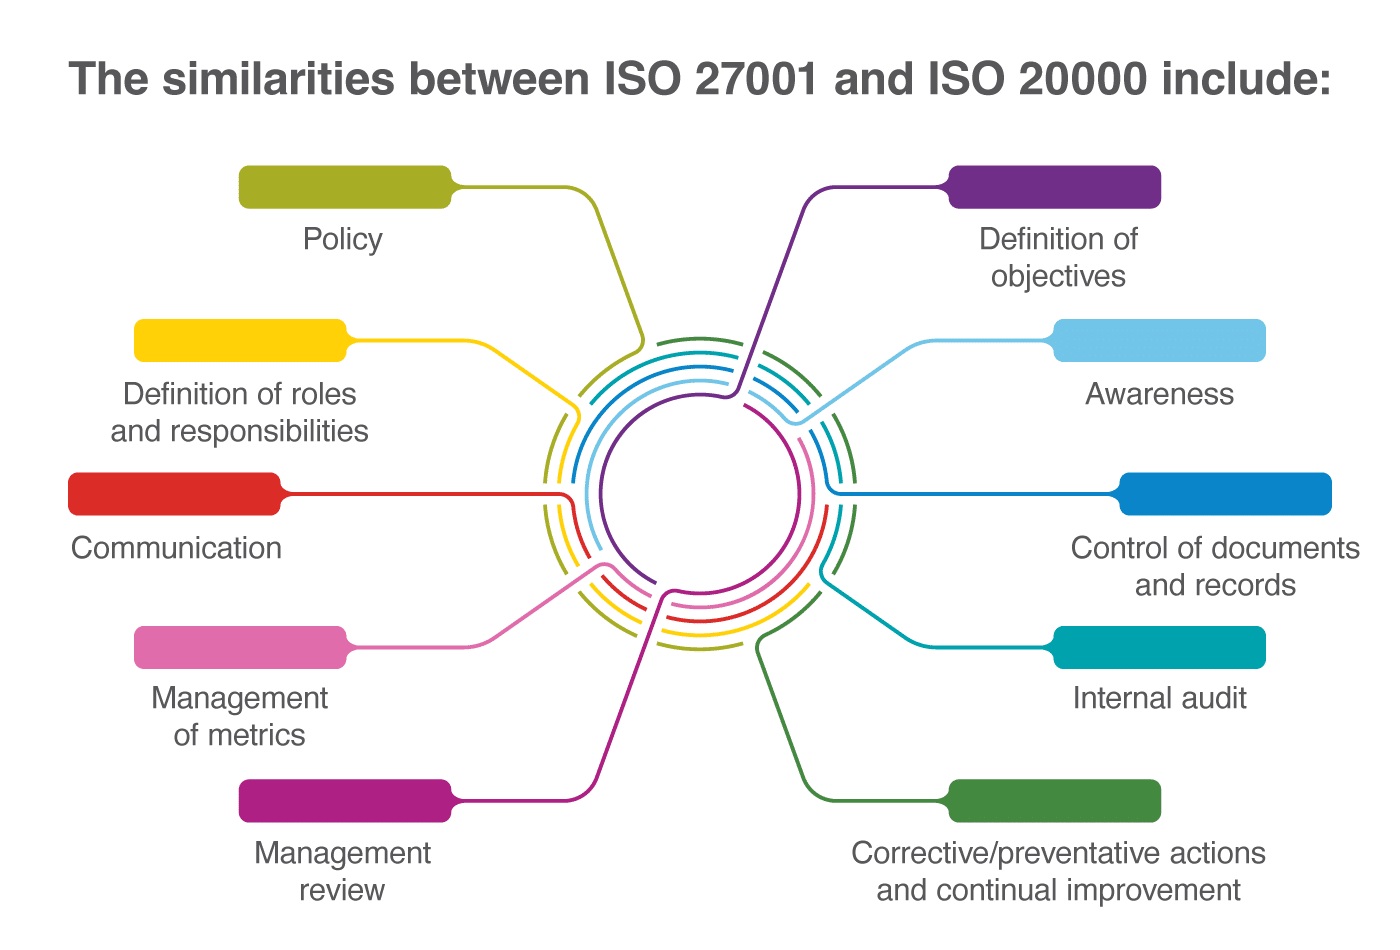 ISO 27001 vs. ISO 20000 – Similarities and differences